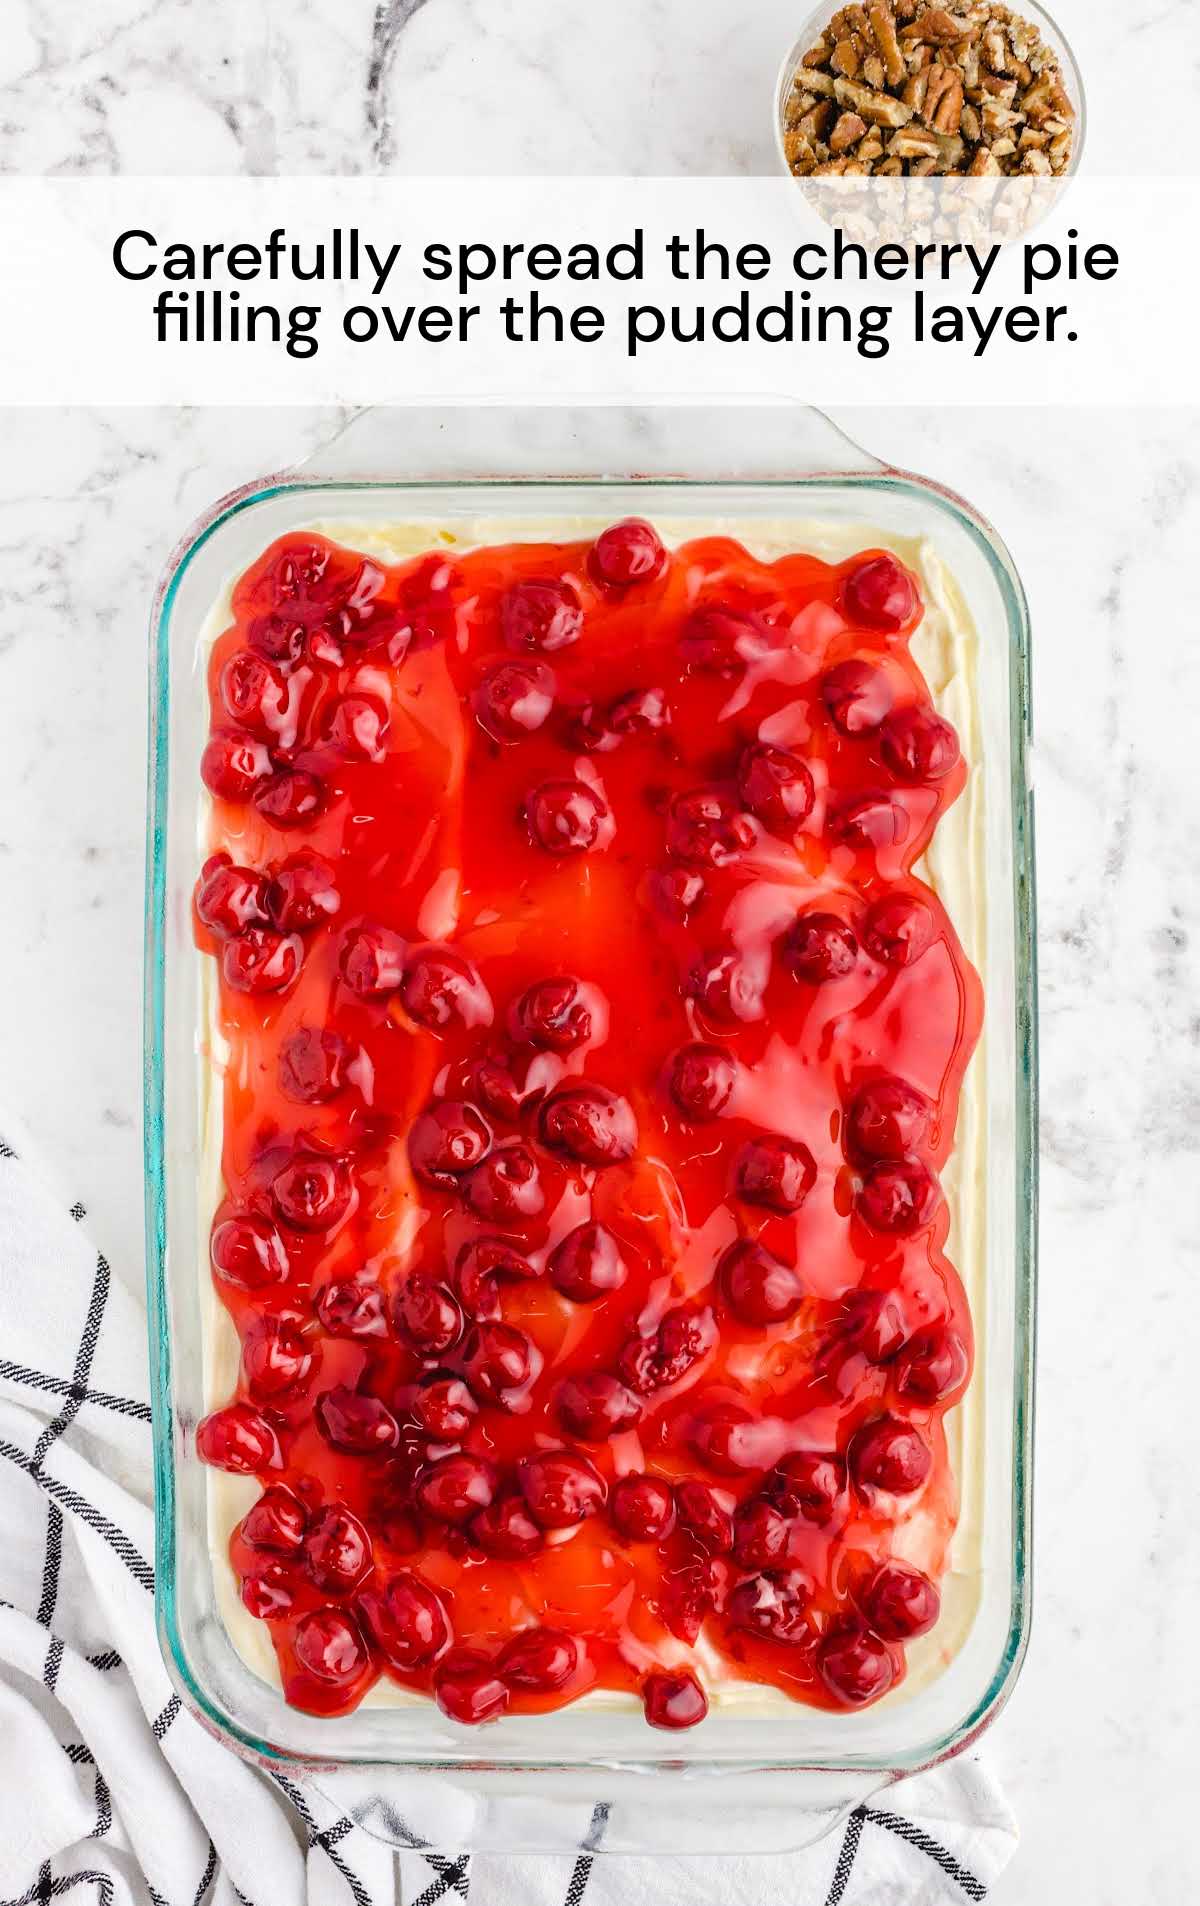 cherry pie filling spread over the pudding layer in a baking dish